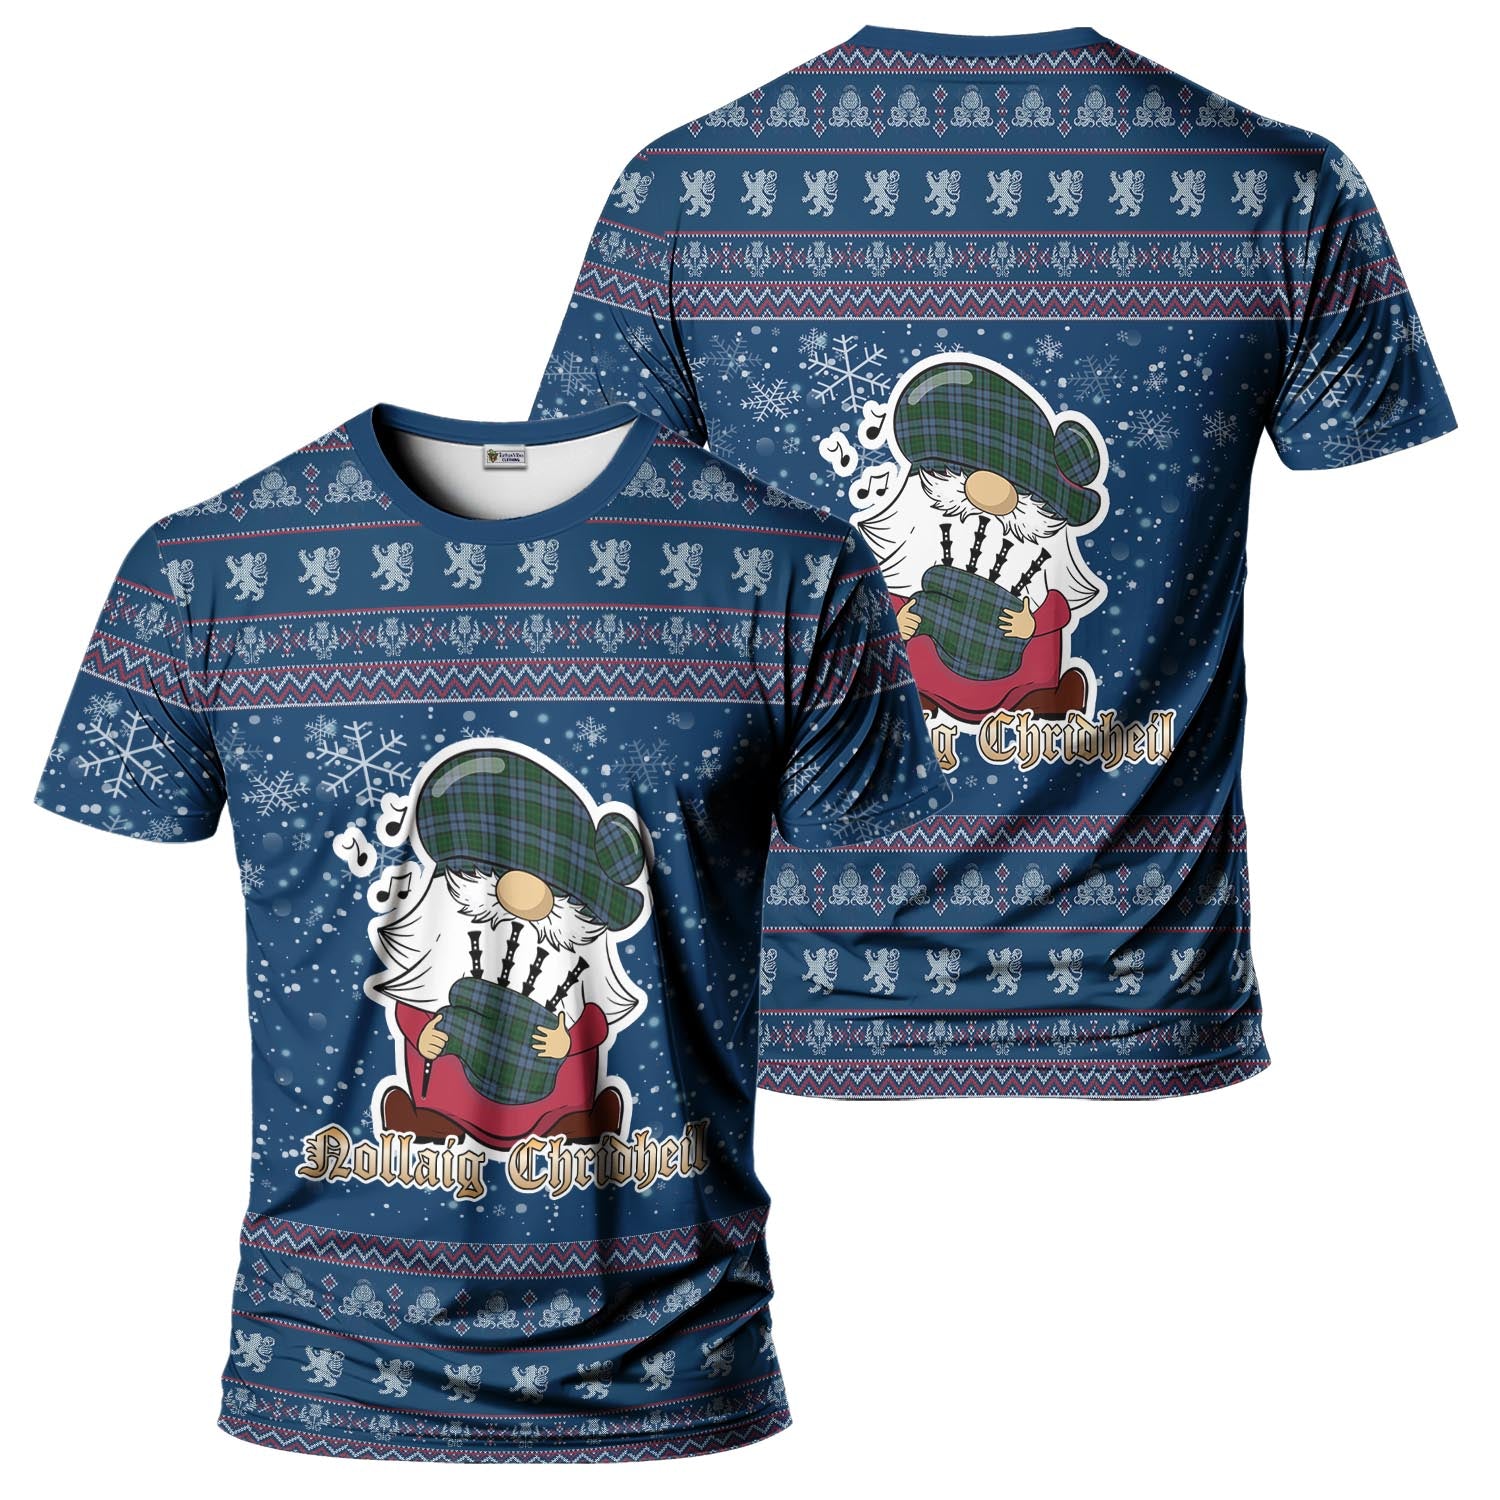 Forsyth Clan Christmas Family T-Shirt with Funny Gnome Playing Bagpipes Kid's Shirt Blue - Tartanvibesclothing